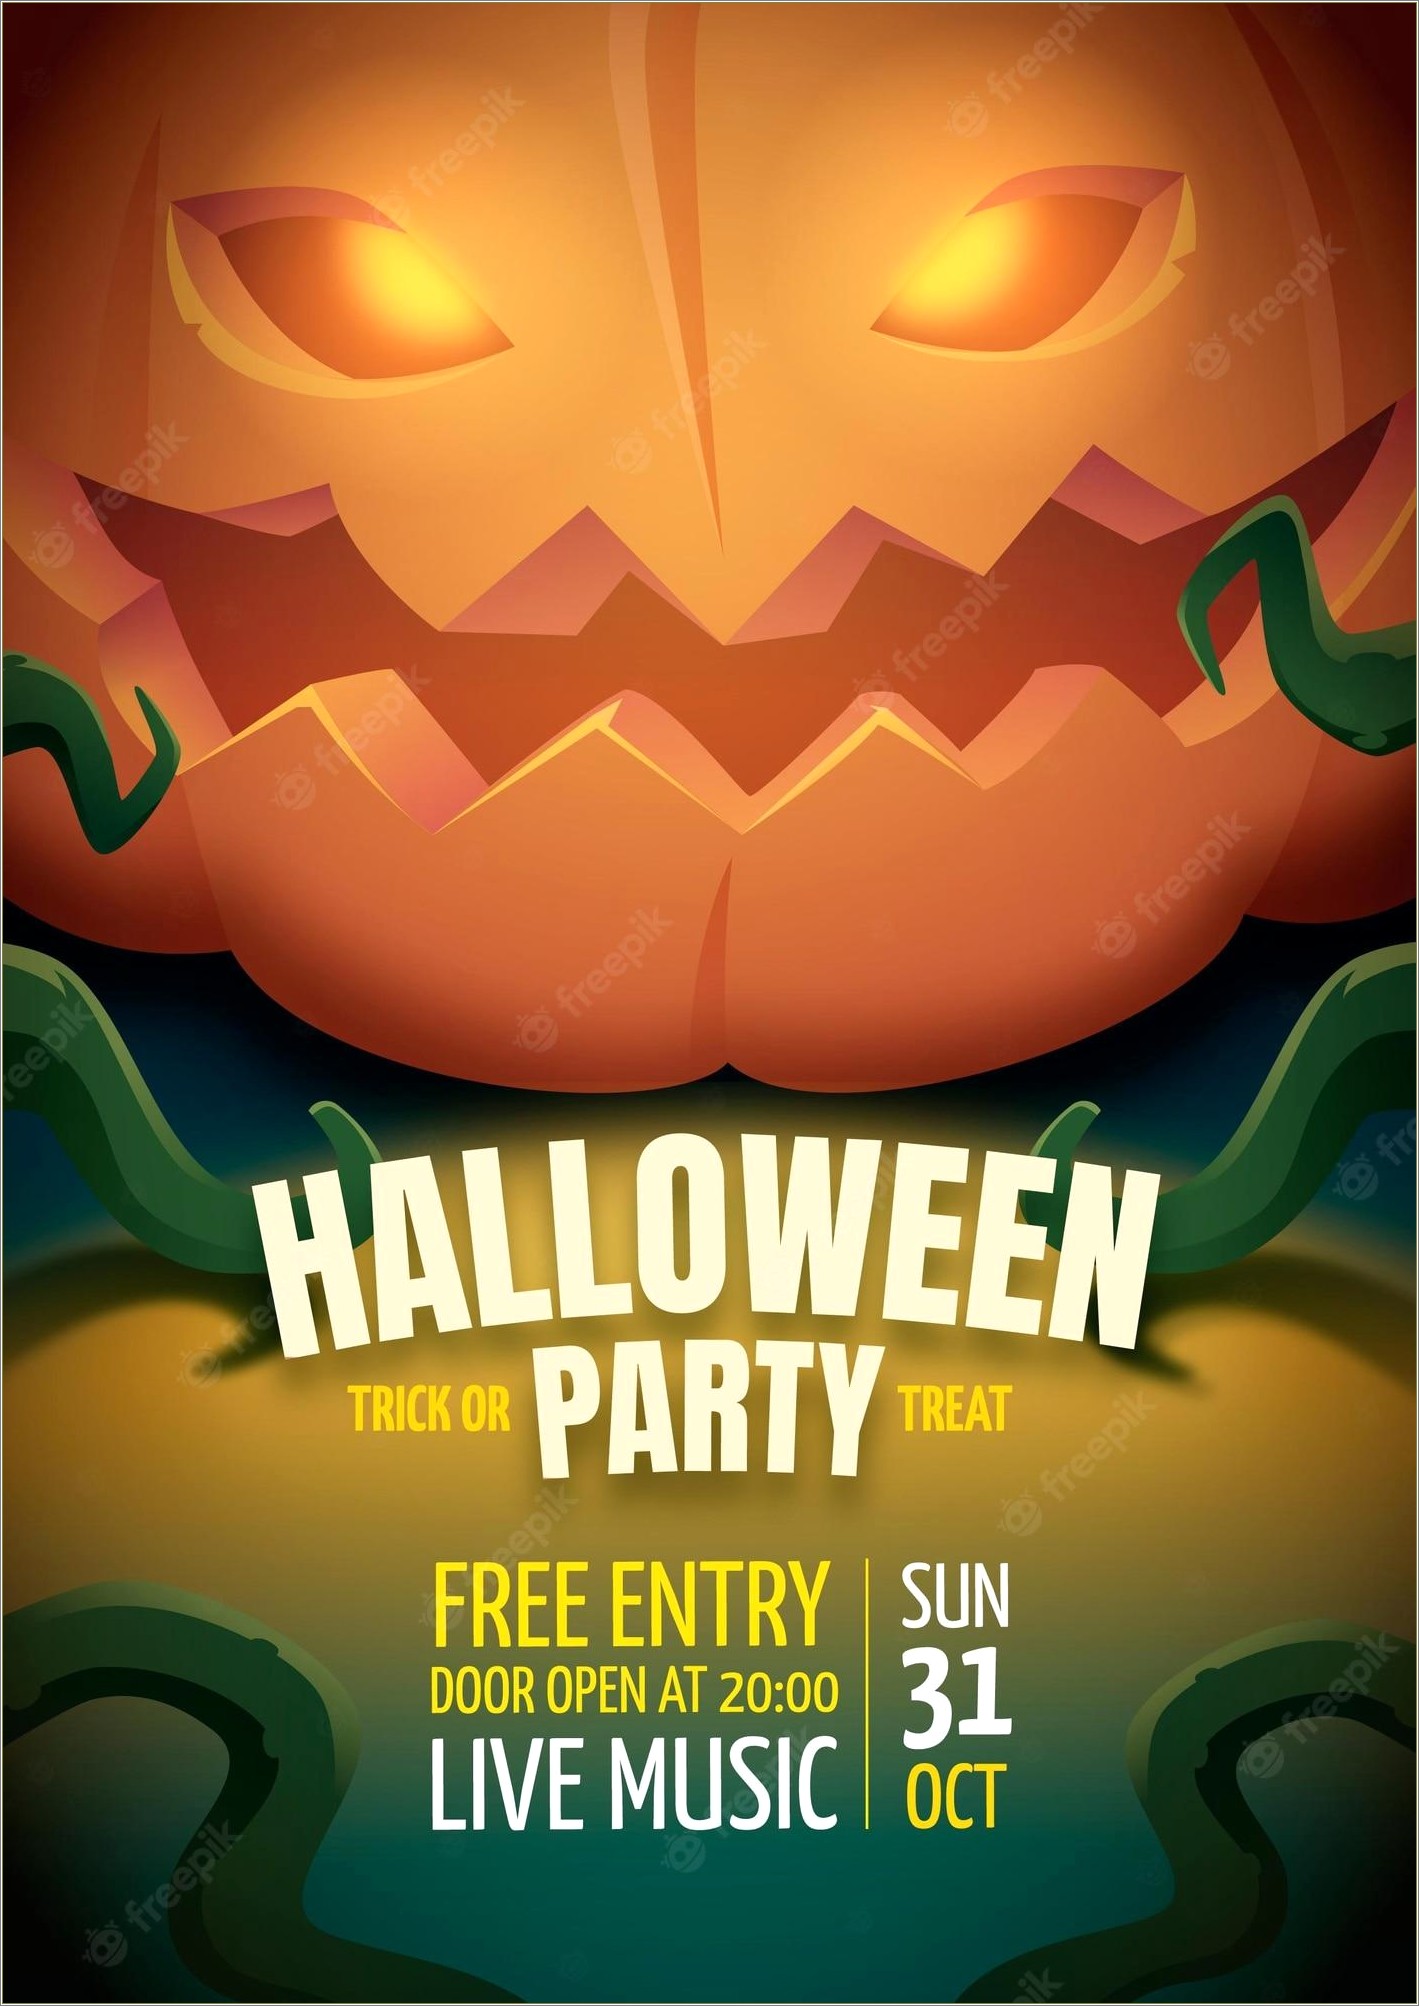 Halloween Invites Free 1 4 Page Template